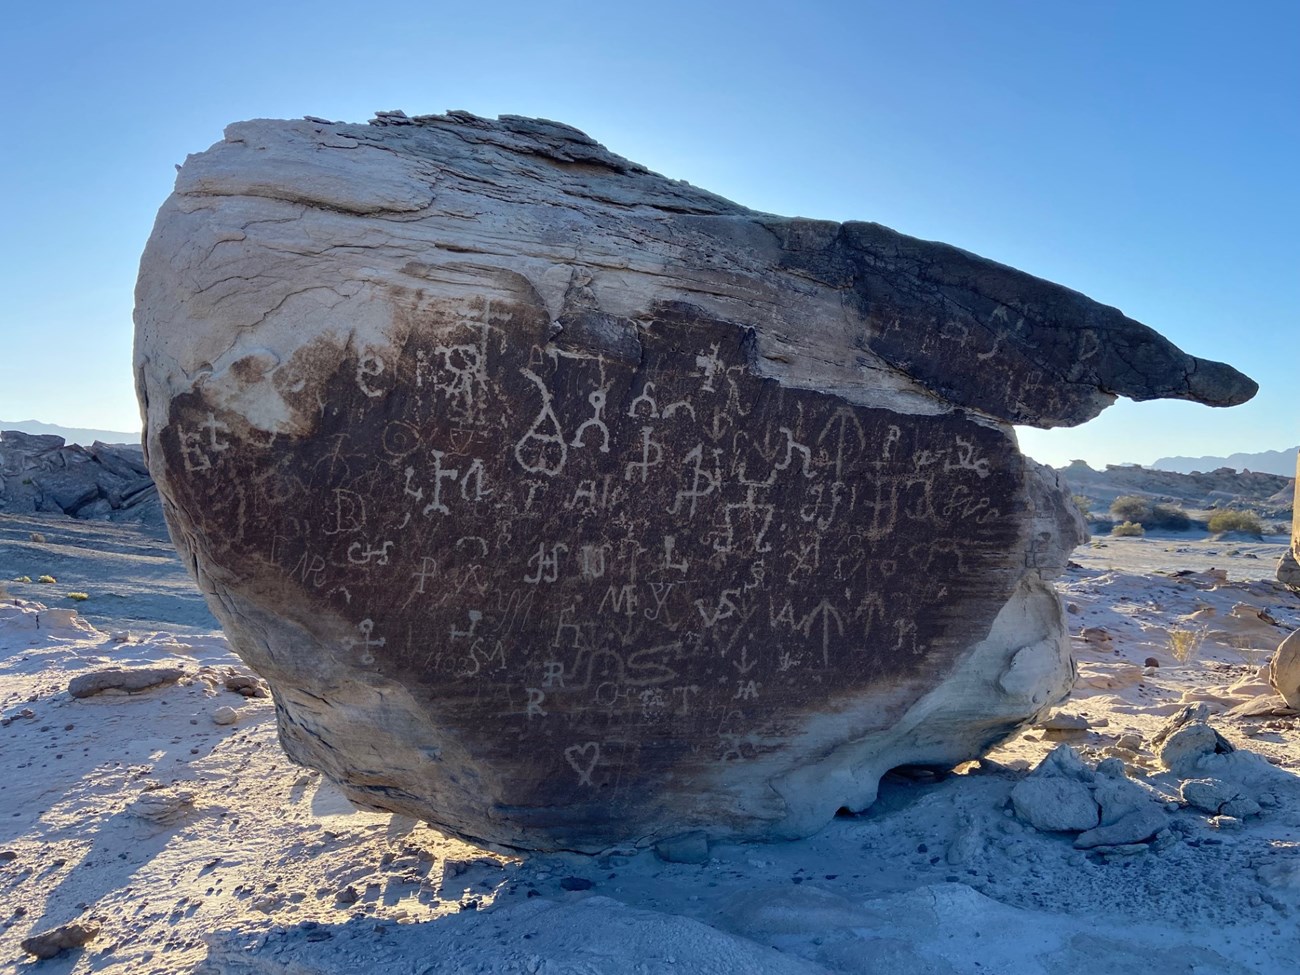 Photo of a large boulder with rock art inscriptions.